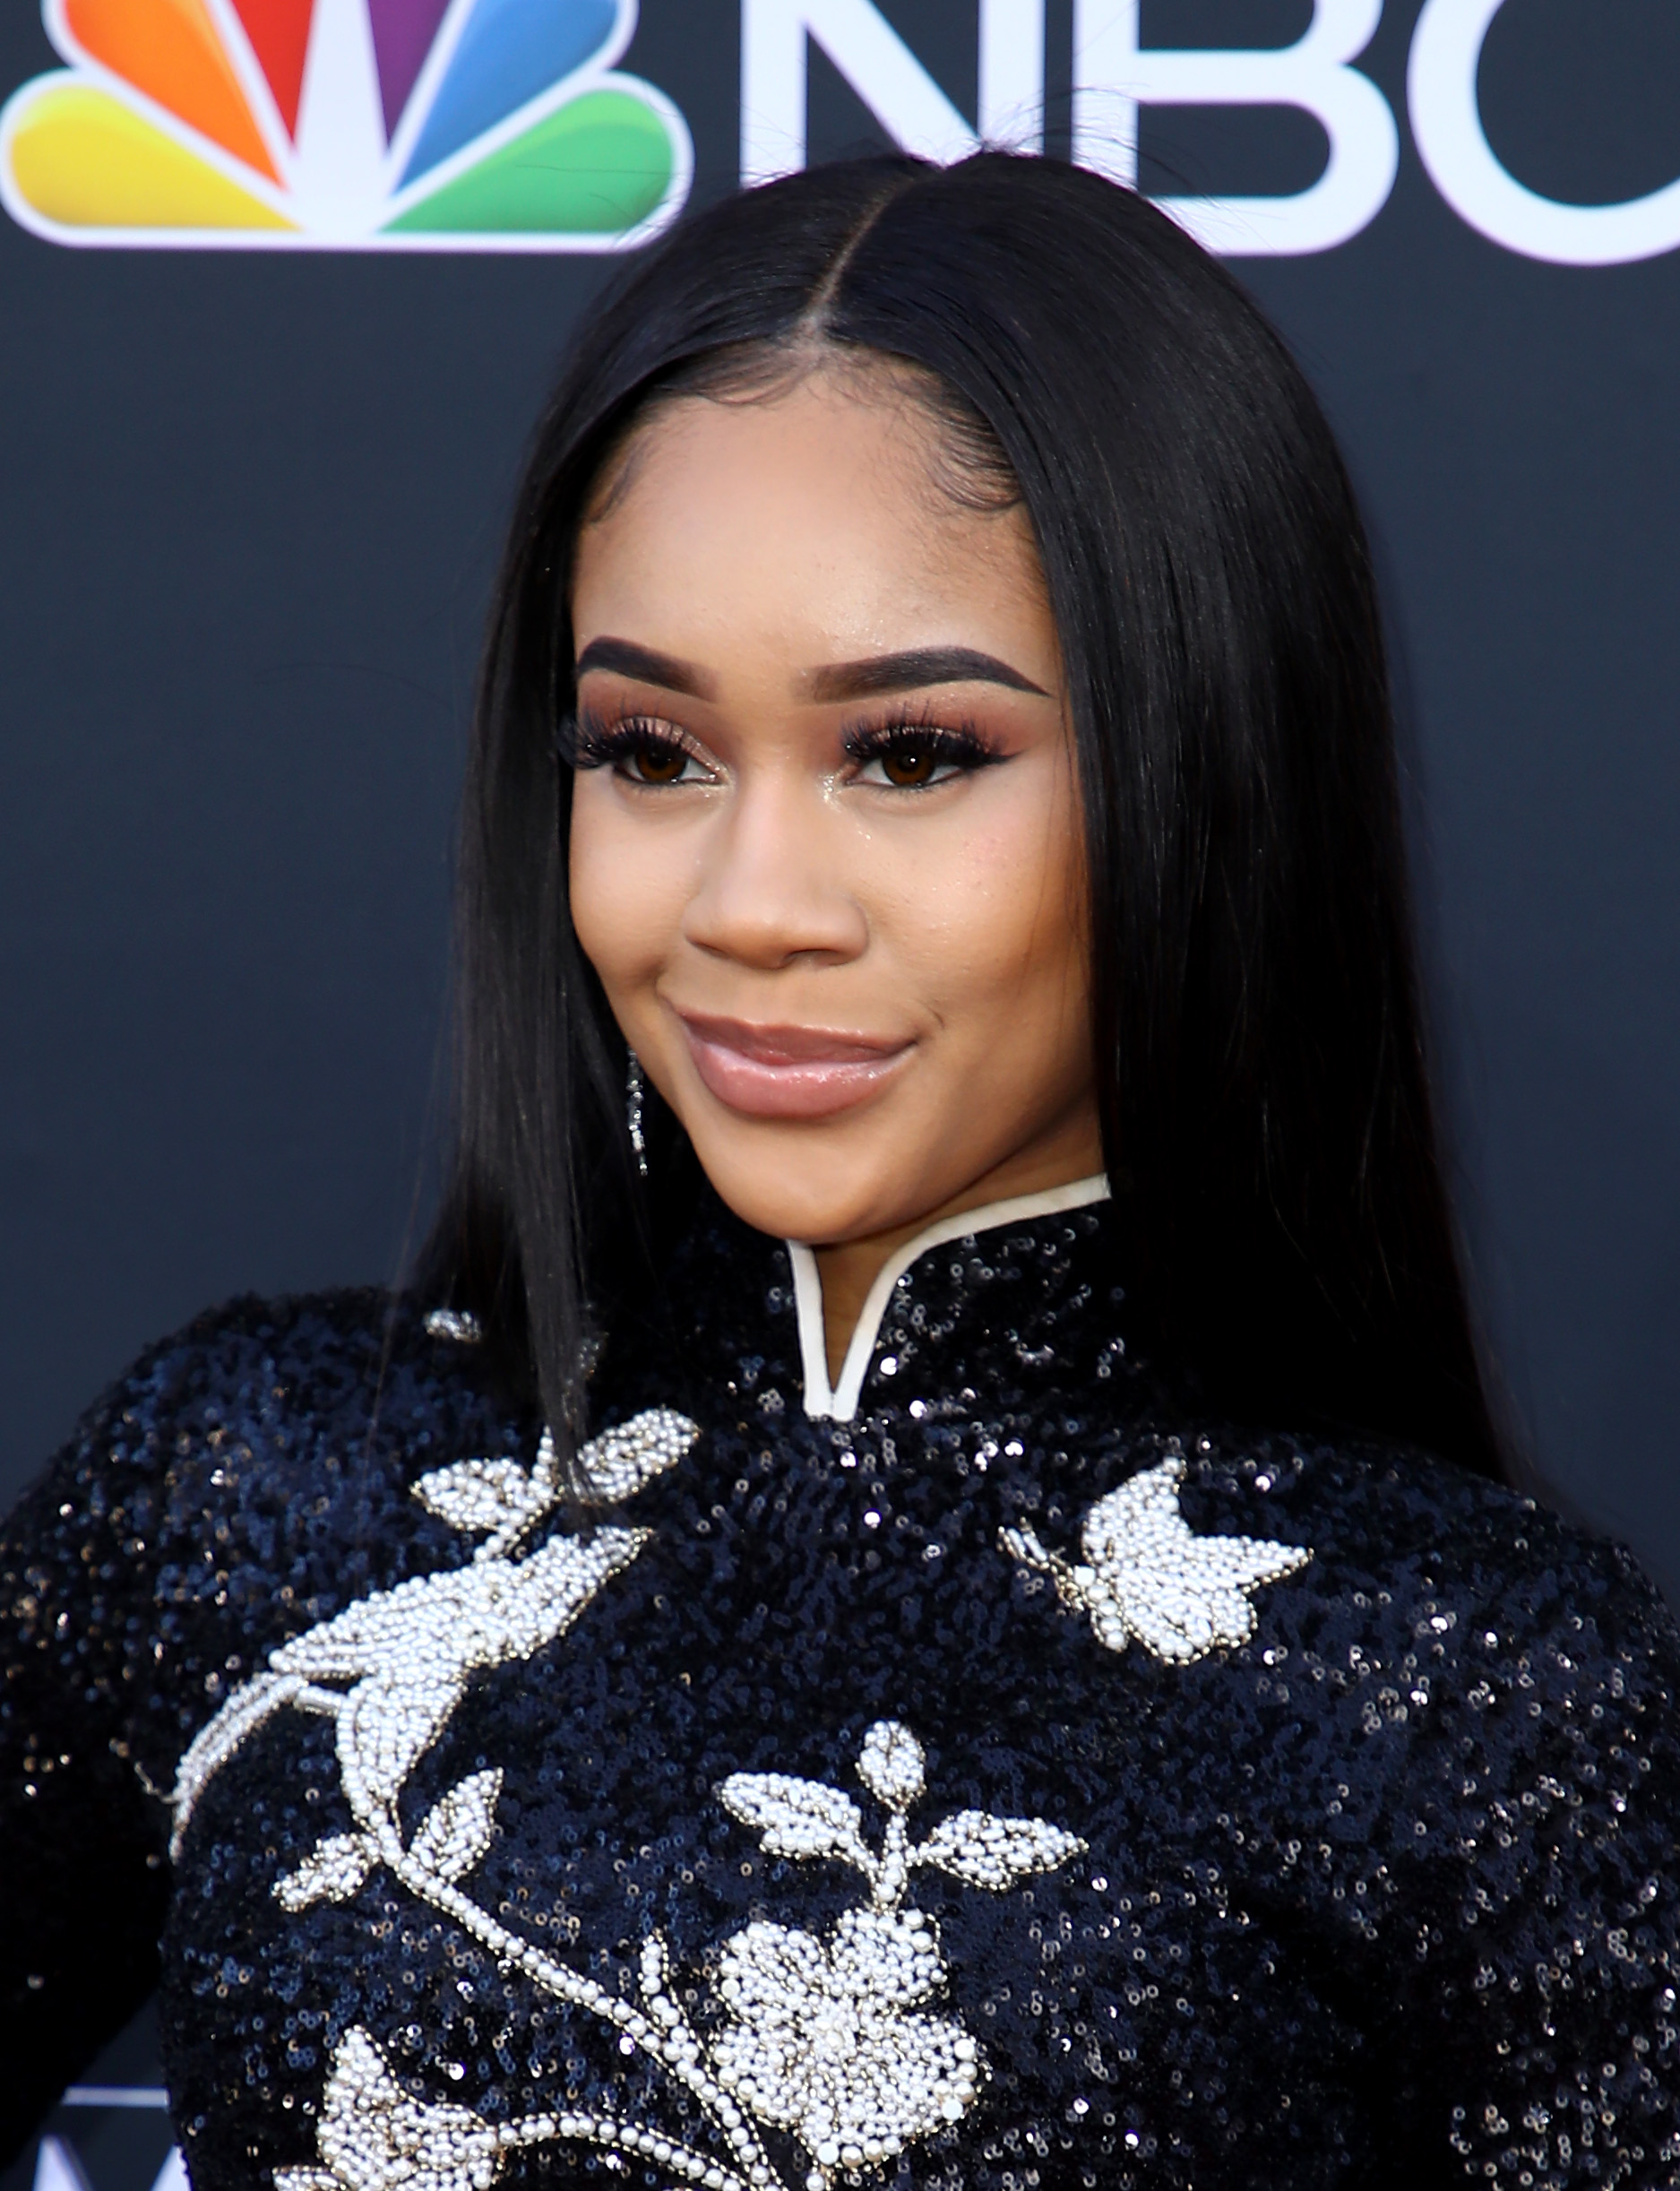 Saweetie at the Billboard Awards in 2019, is not with fetishizing mixed-race women